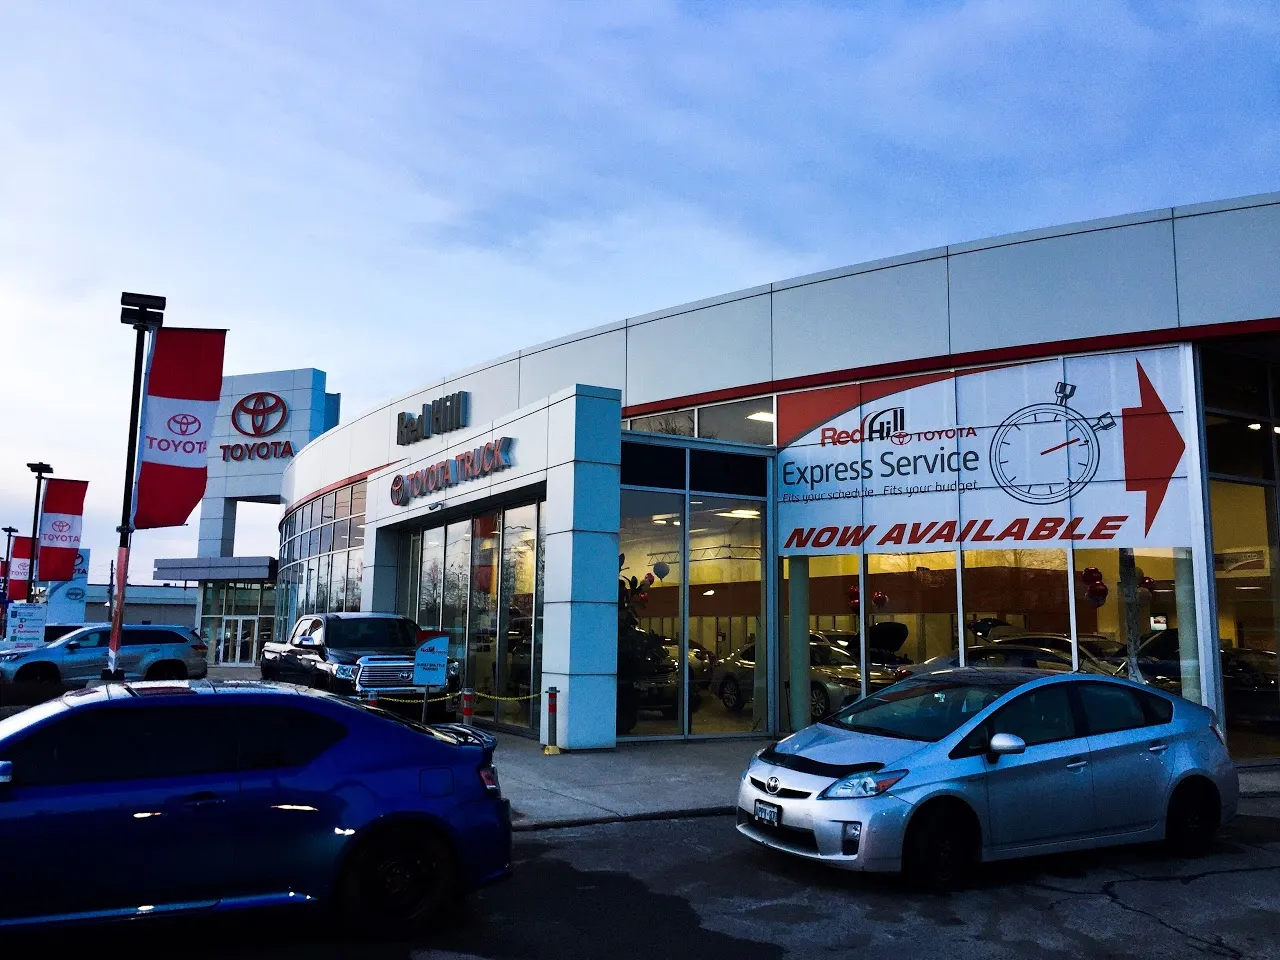 Red Hill Toyota